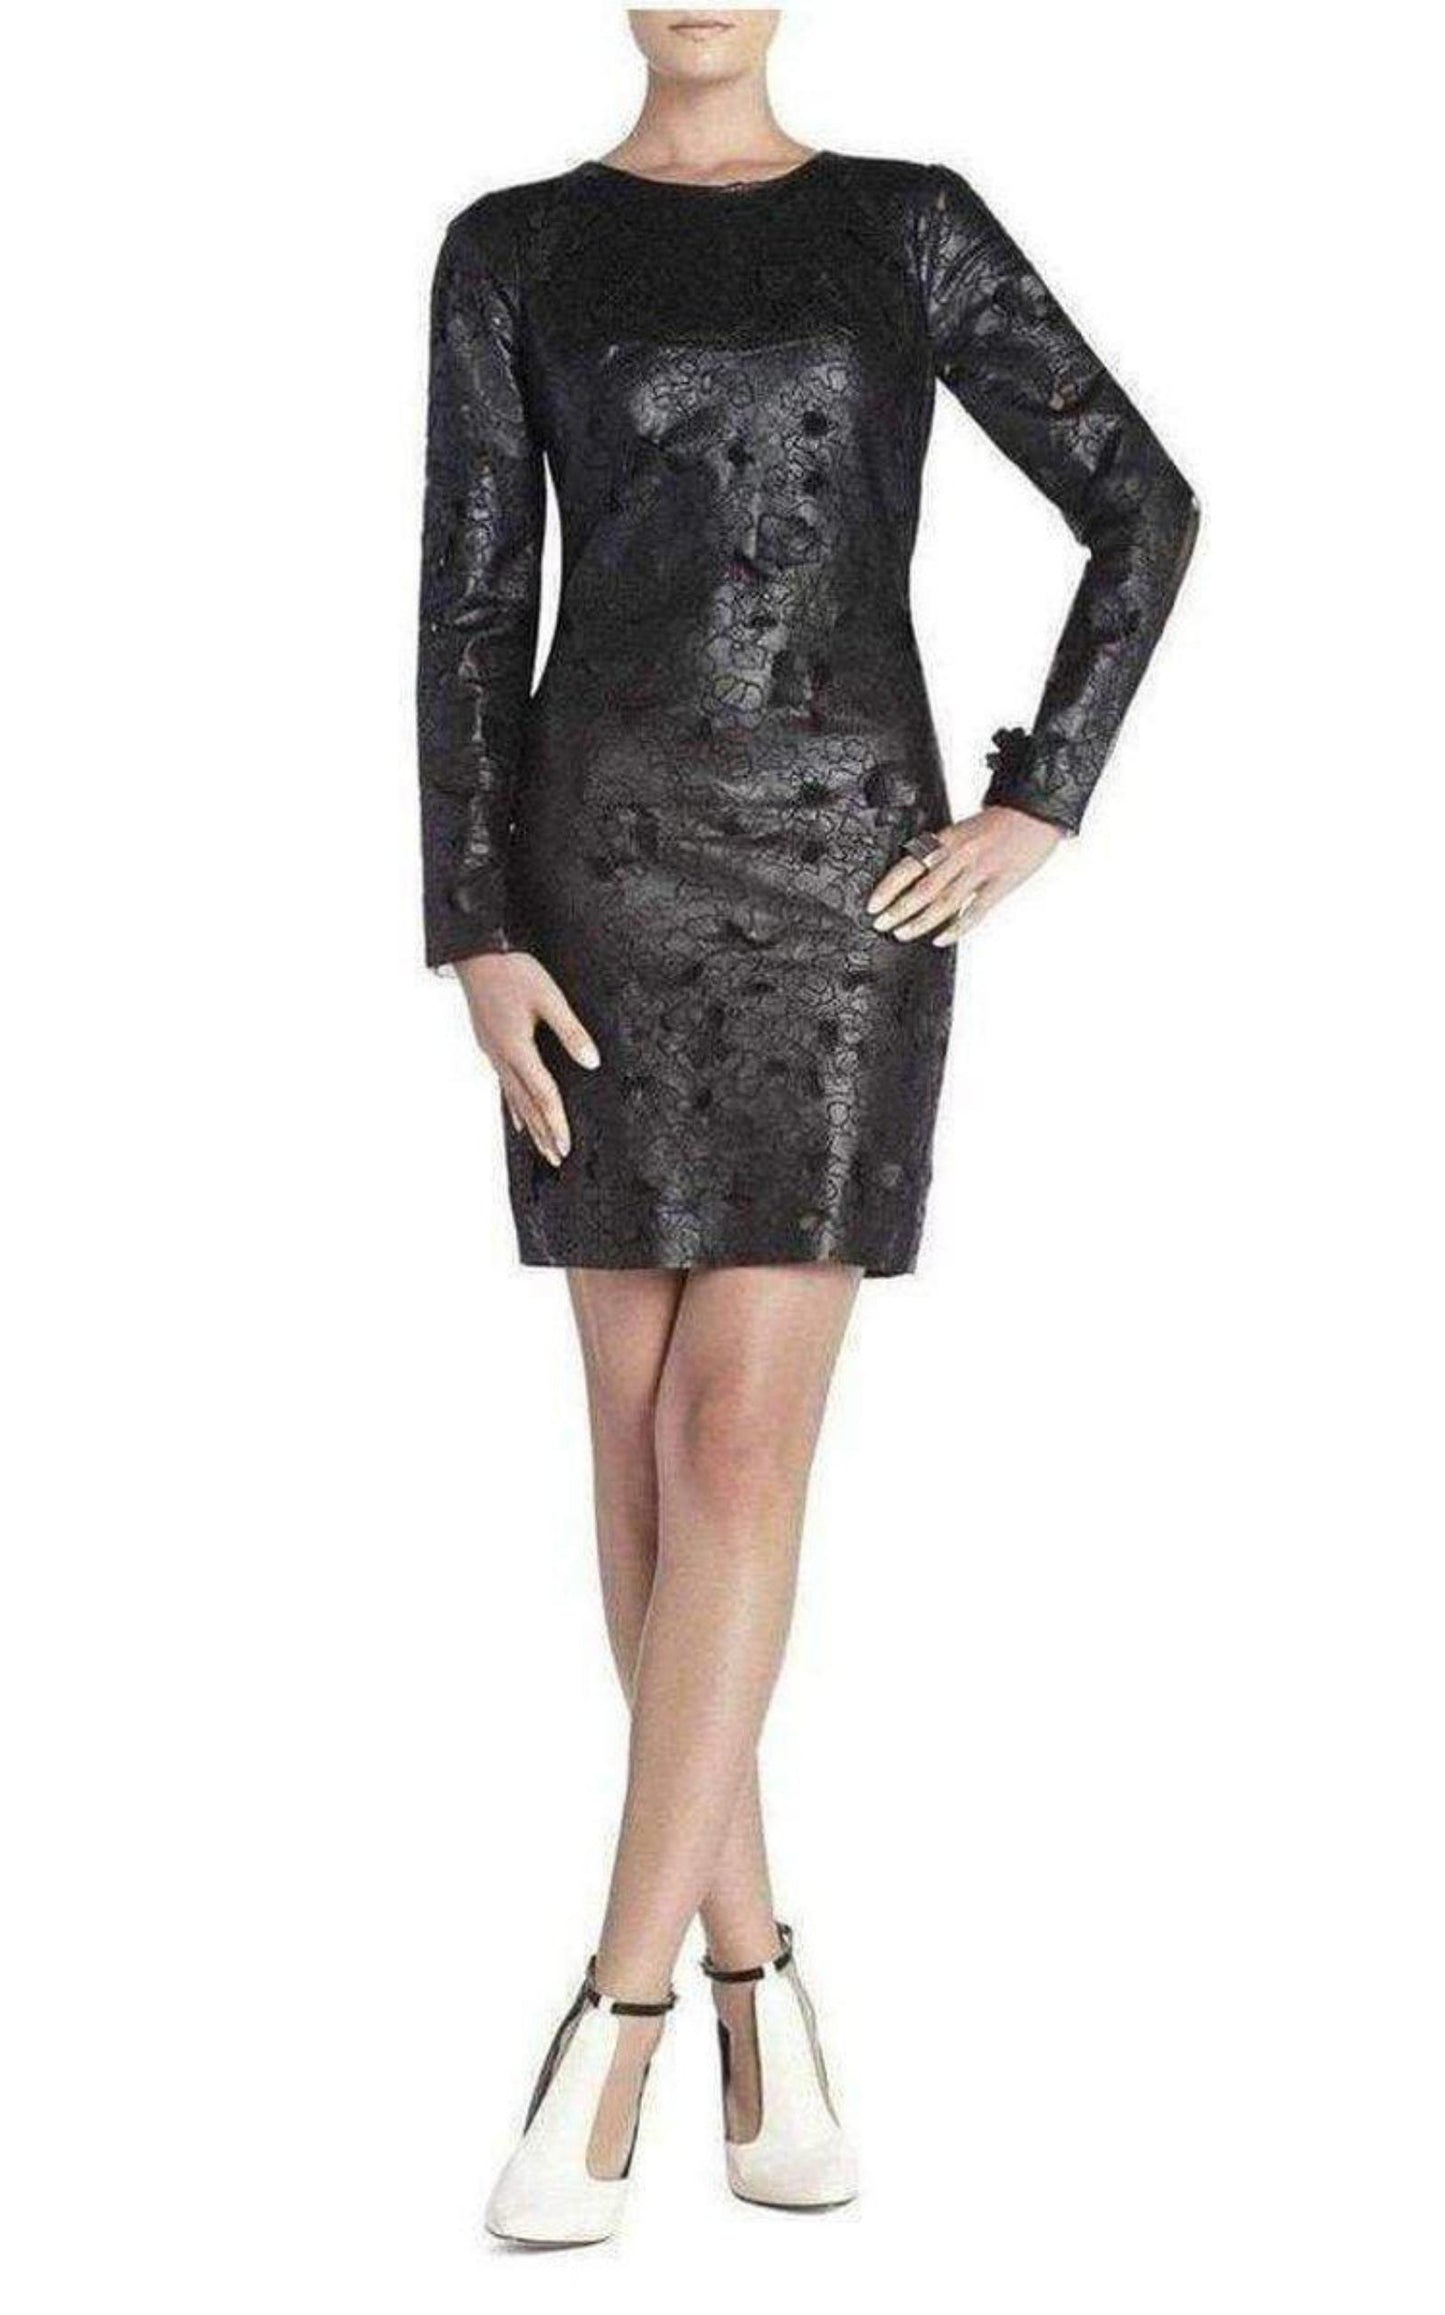  BCBGMAXAZRIAEmbroidered Cutout Faux Leather Dress - Runway Catalog